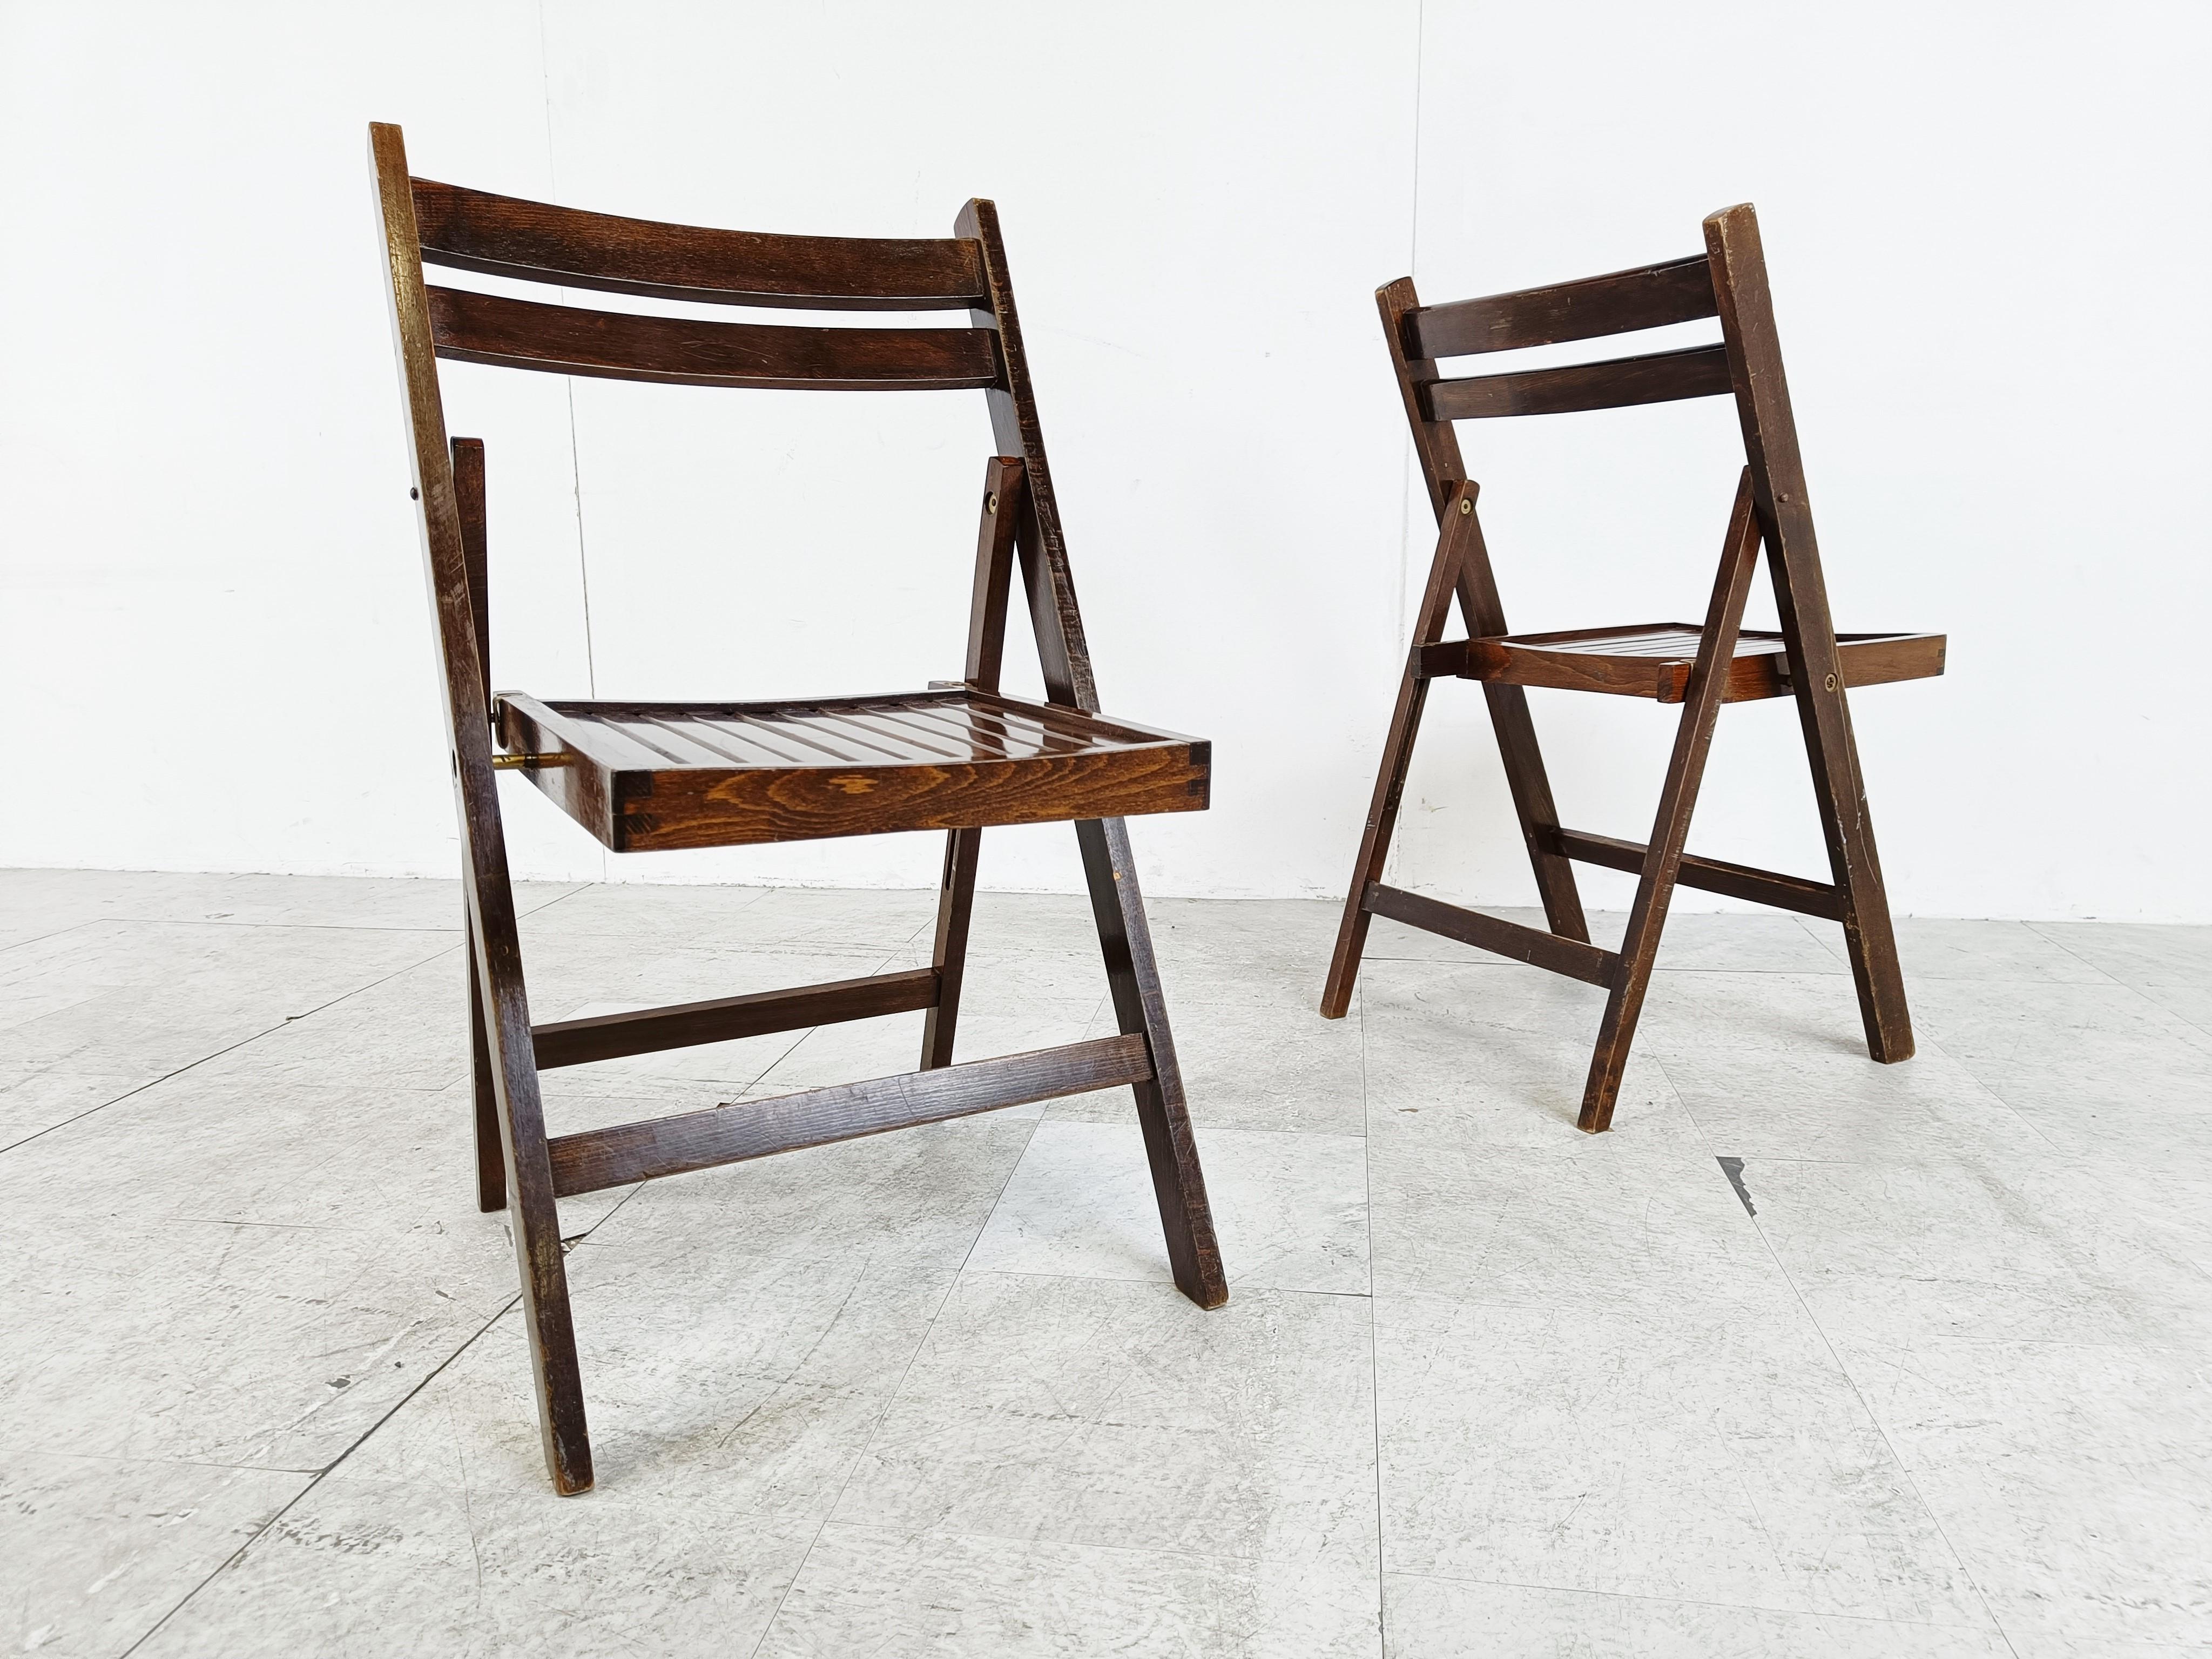 Midcentury Wooden Folding Chairs, 1950s  For Sale 1